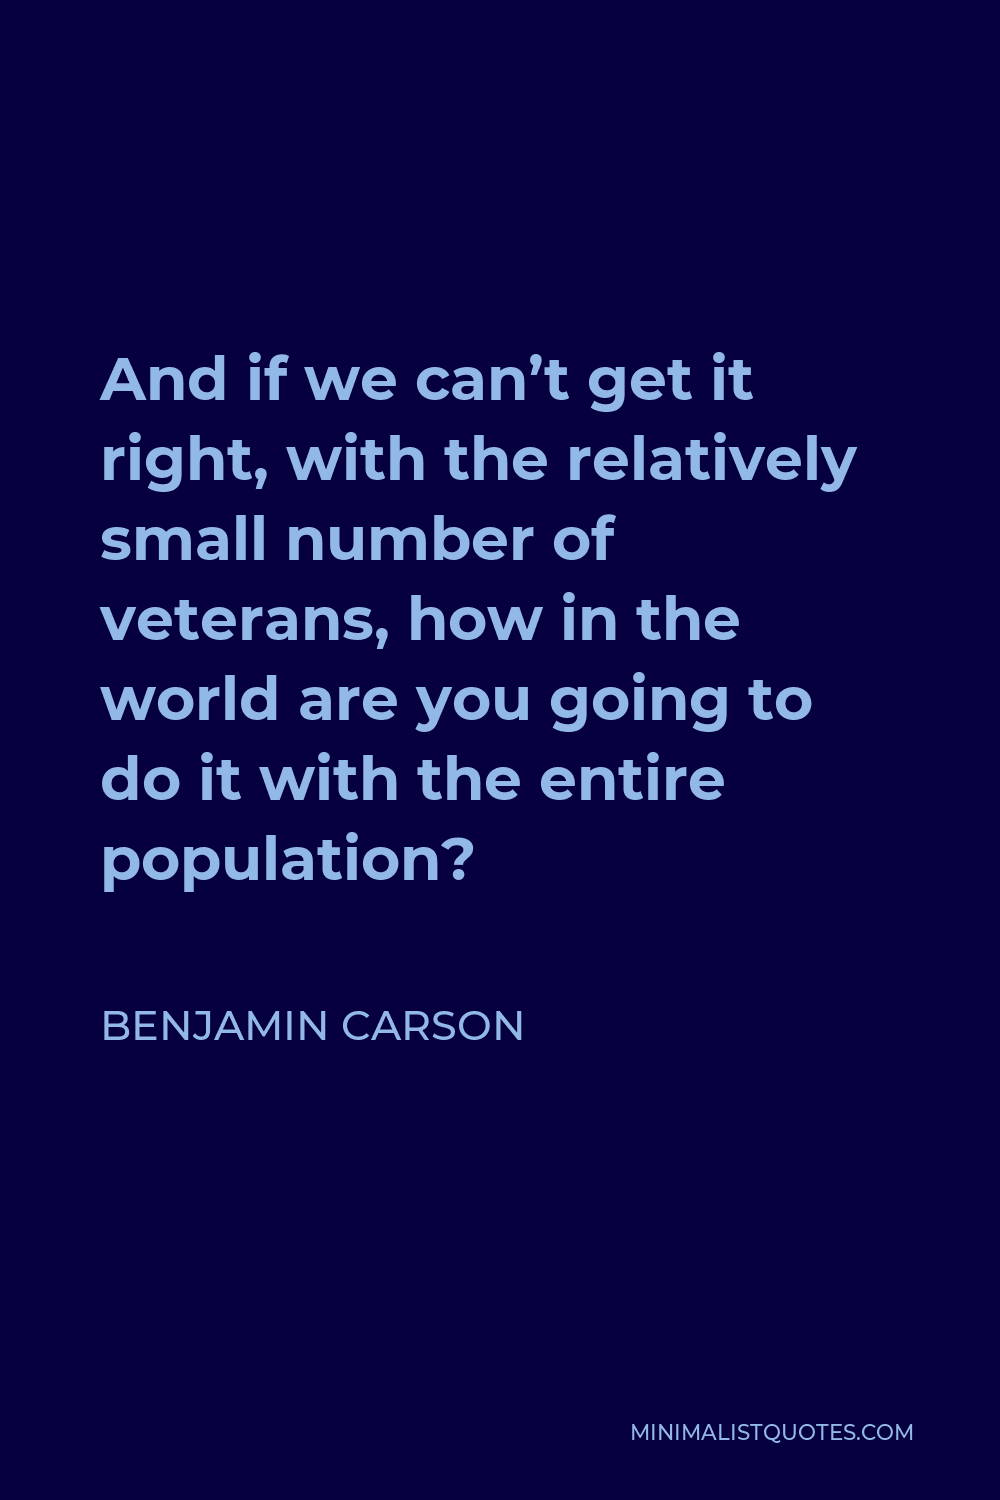 Benjamin Carson Quote - And if we can’t get it right, with the relatively small number of veterans, how in the world are you going to do it with the entire population?